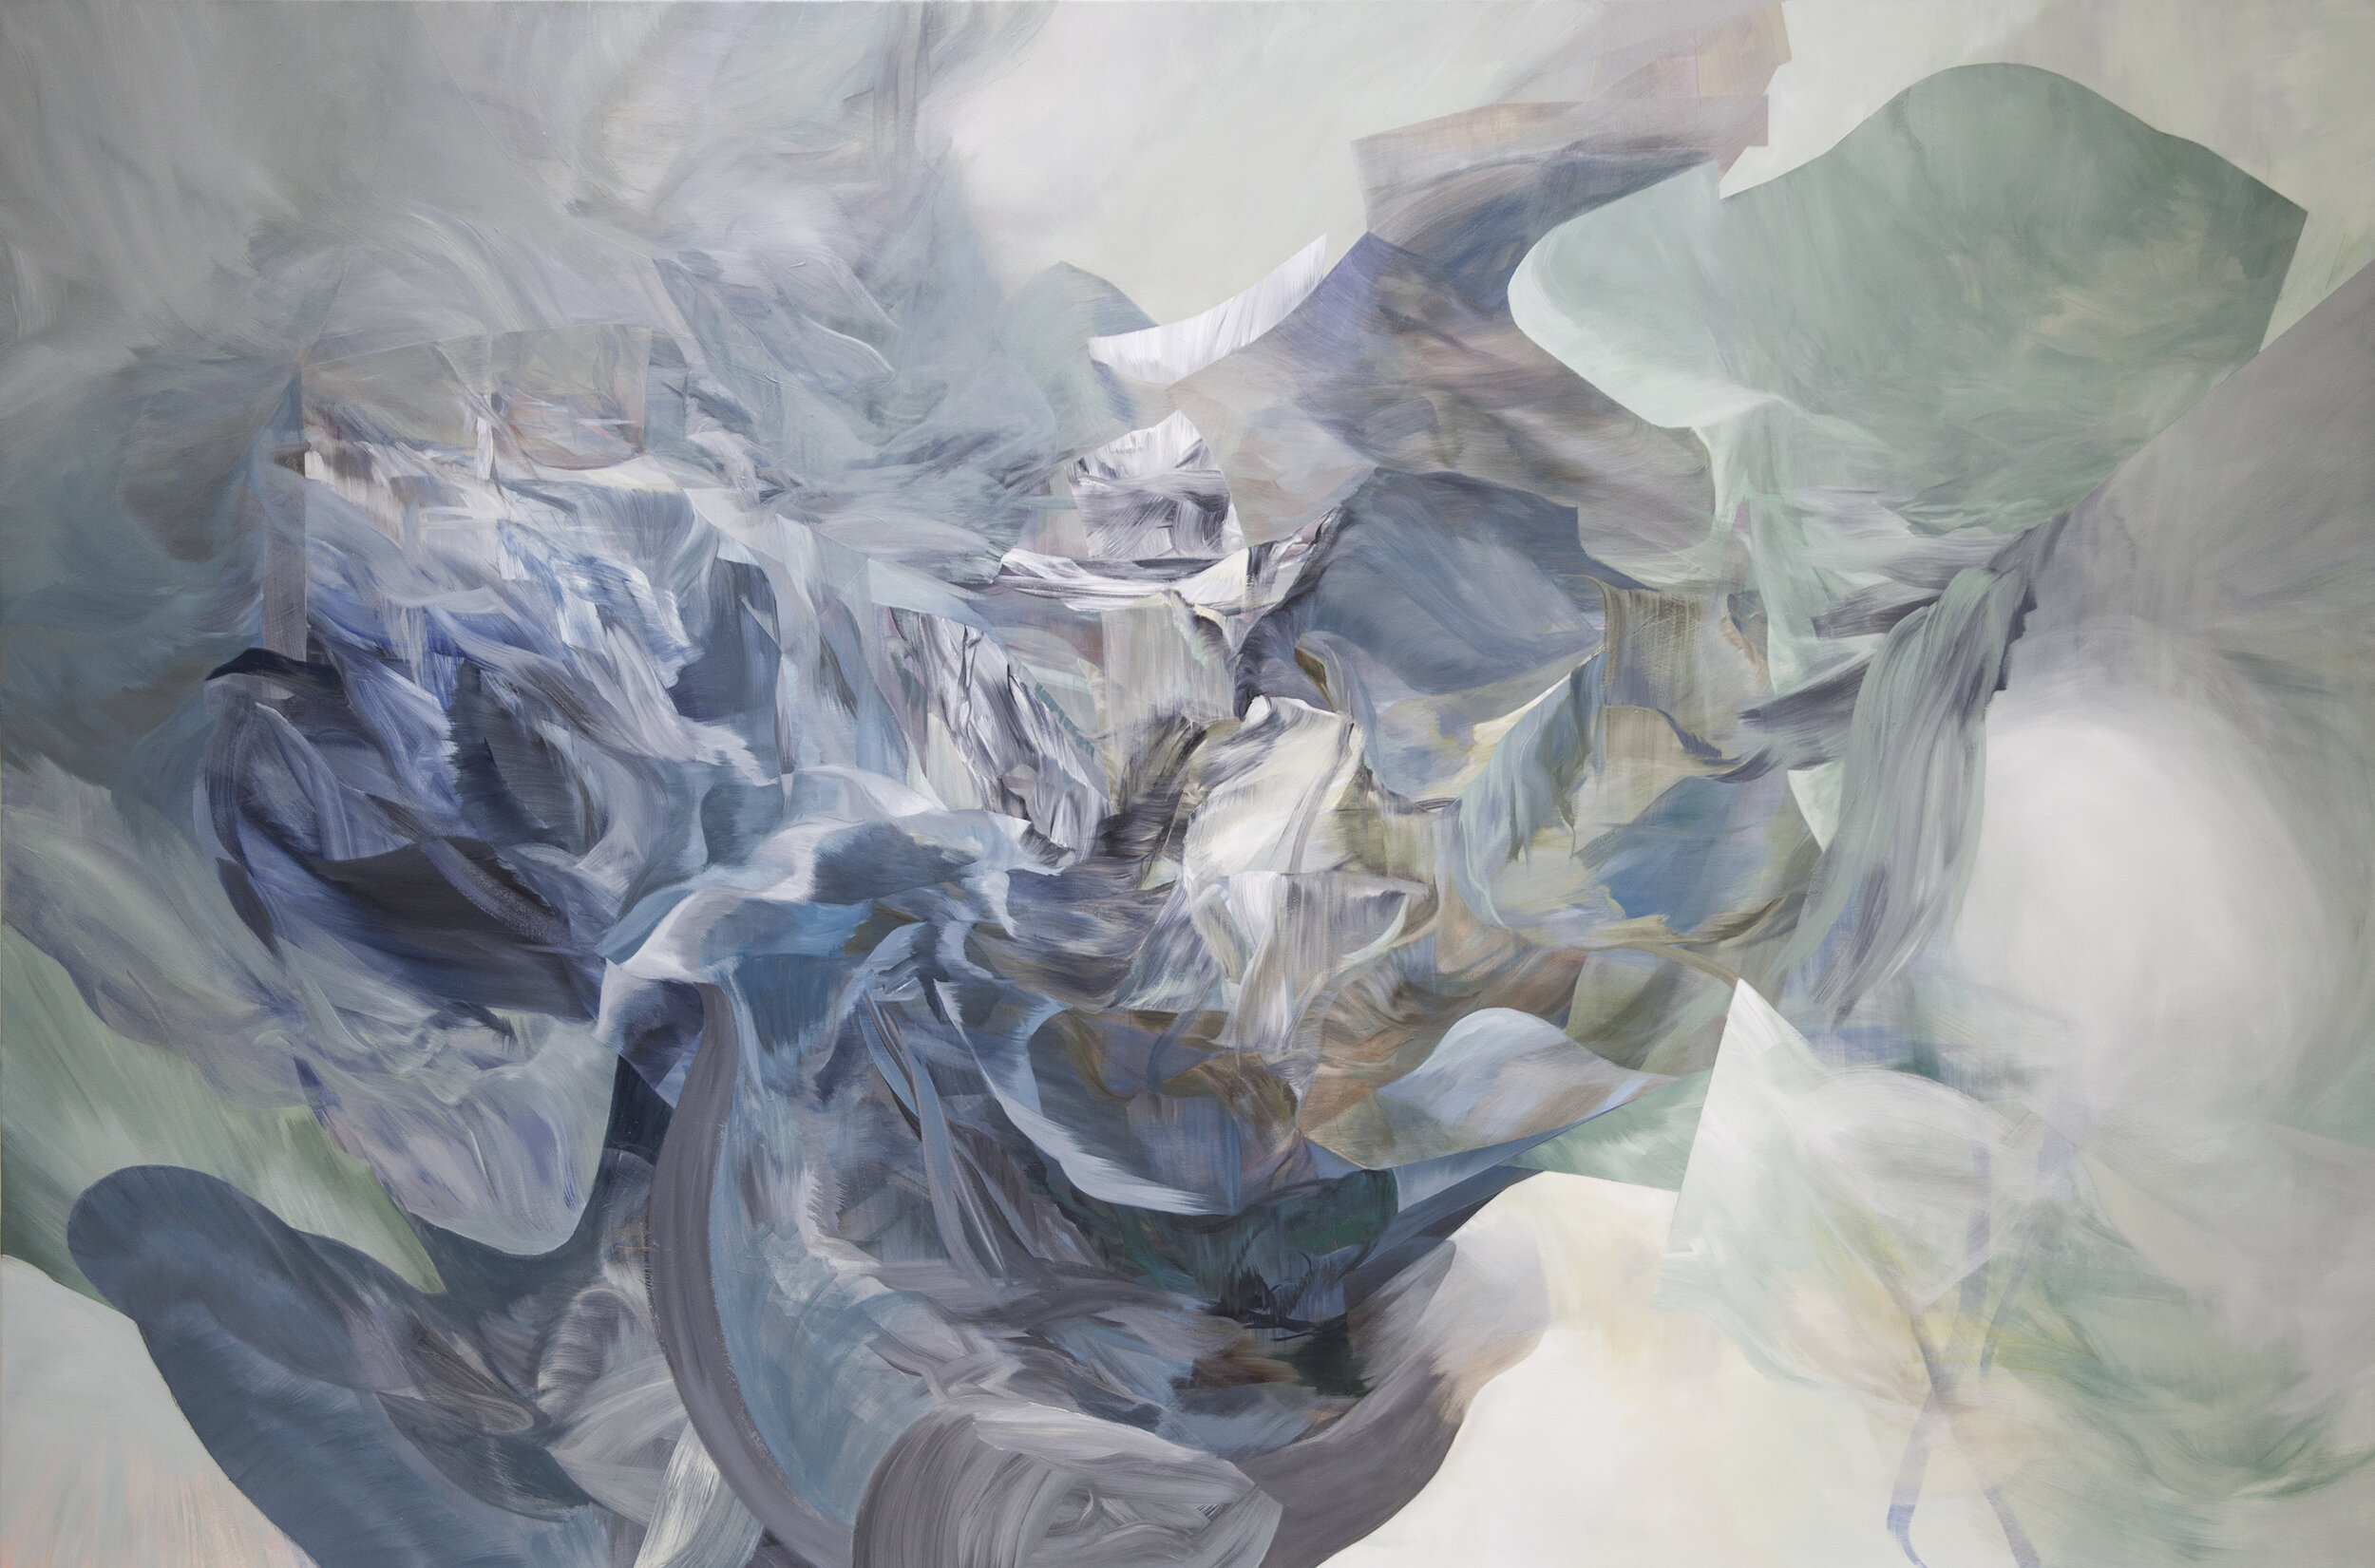   Fraught to Unfurl   acrylic on canvas  72" x 108" 